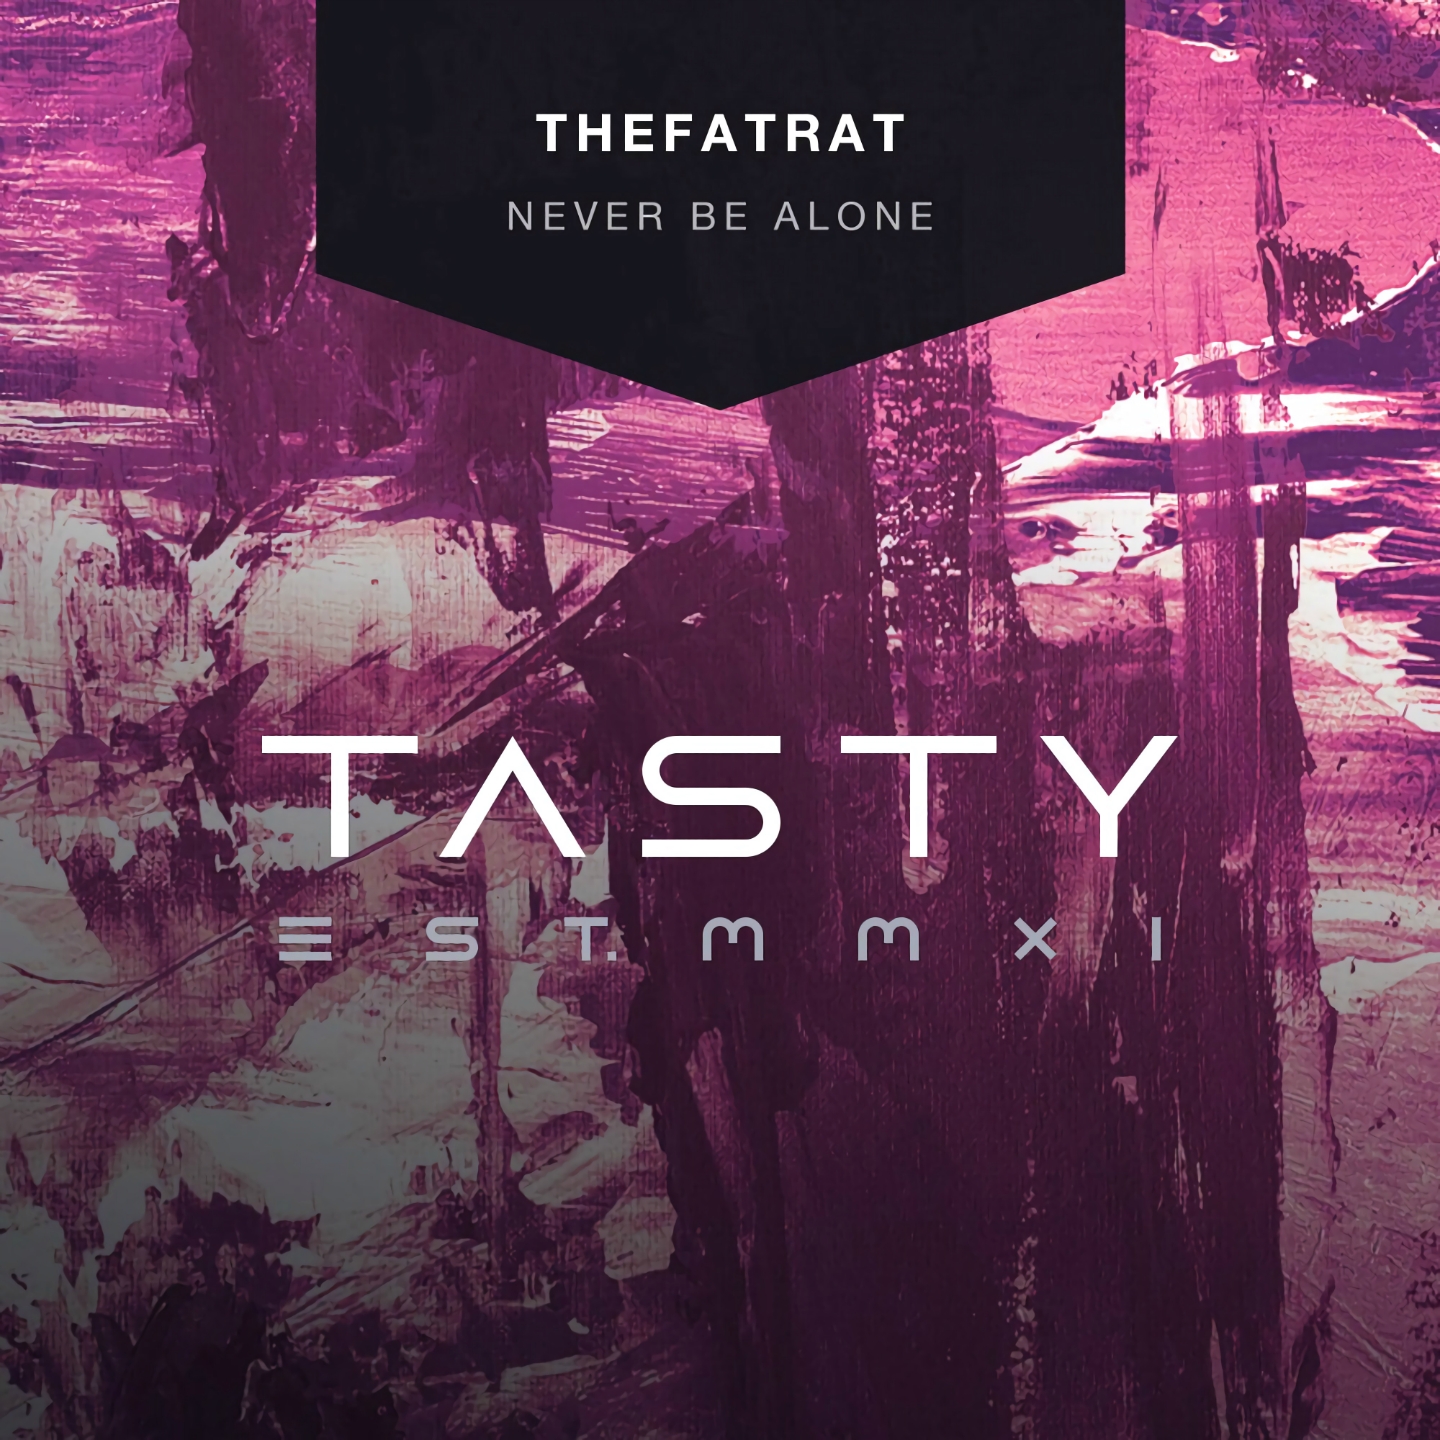 Newer be alone. THEFATRAT never be Alone. THEFATRAT обложки. Never be Alone. THEFATRAT плейлист.